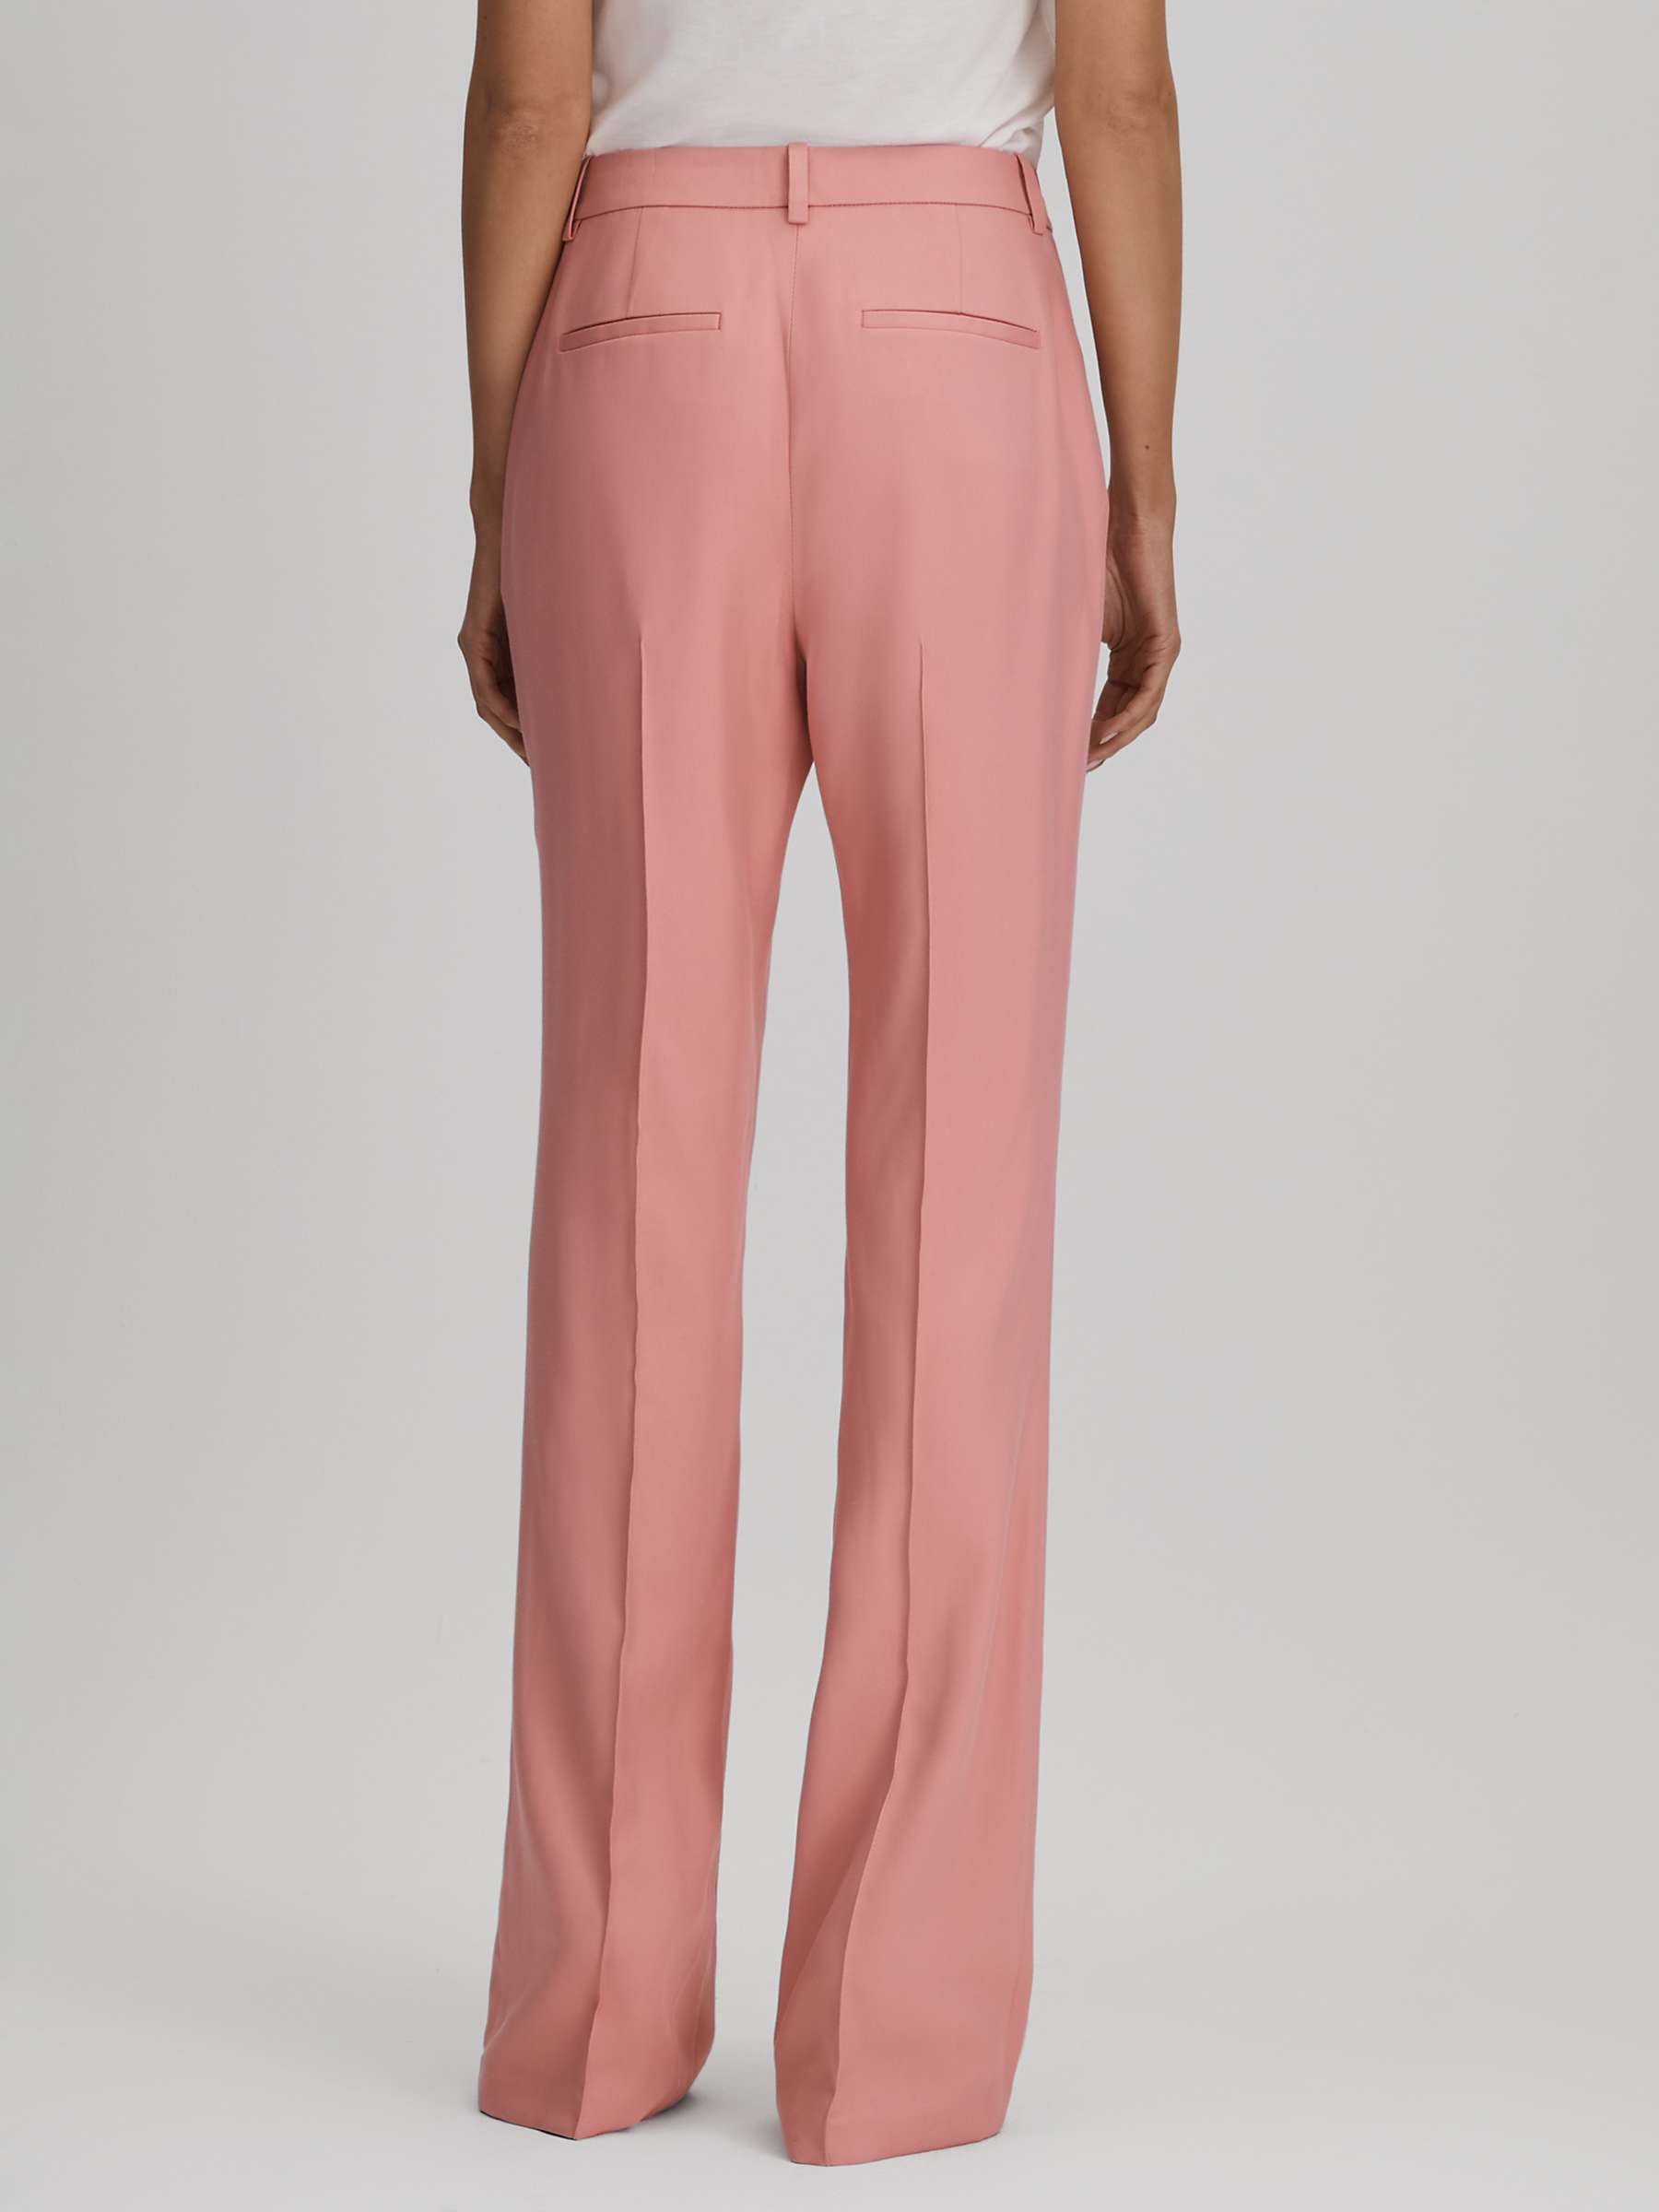 Buy Reiss Petite Millie Flared Tailored Trousers Online at johnlewis.com